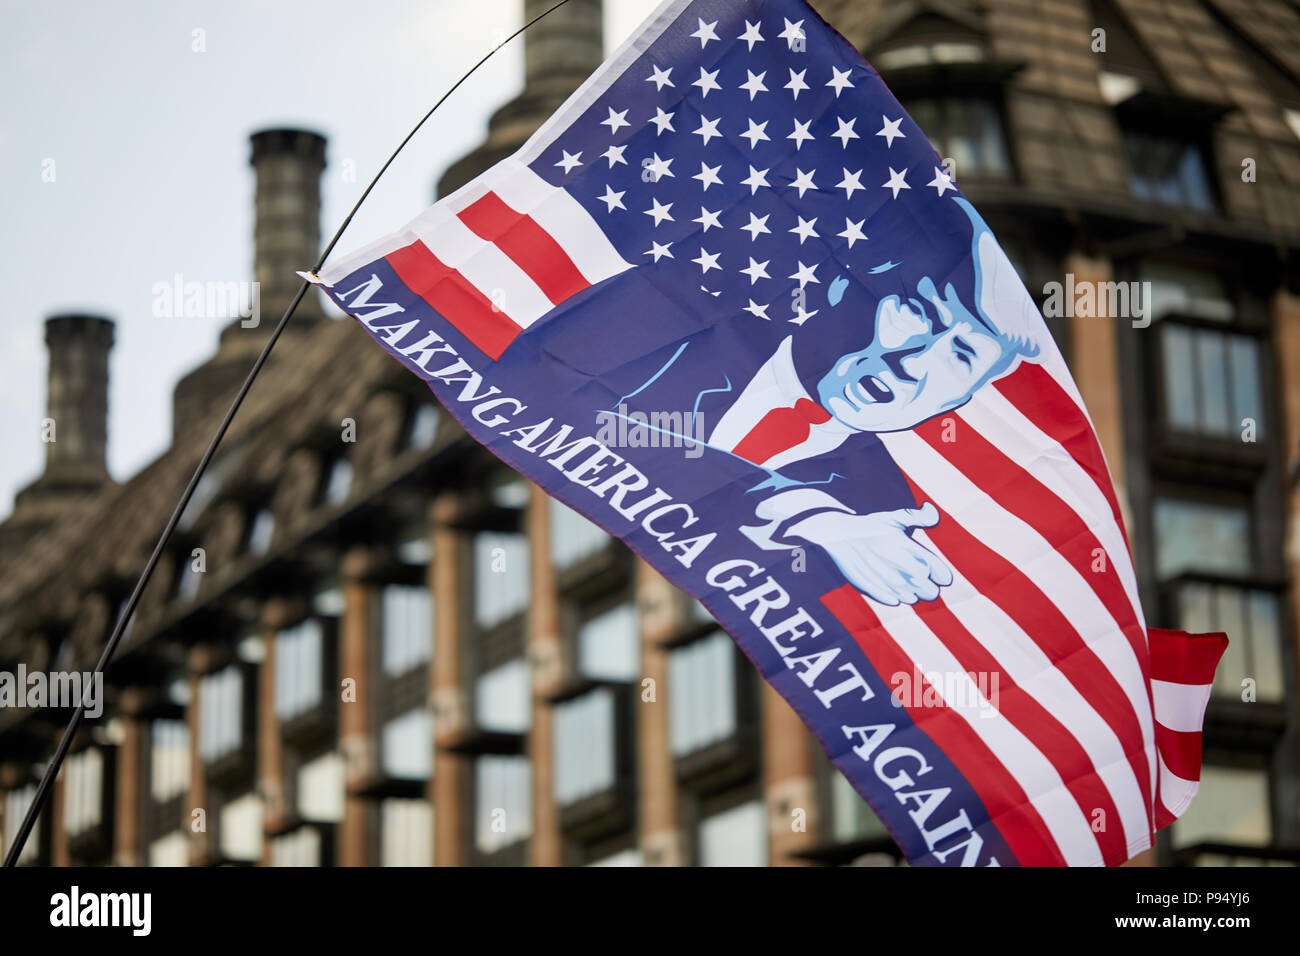 London, U.K. - 14 July 2018: A 'Making America Great Again' flies in front of Portcullis House, Westminster during a Pro-Donald Trump rally and march. Stock Photo